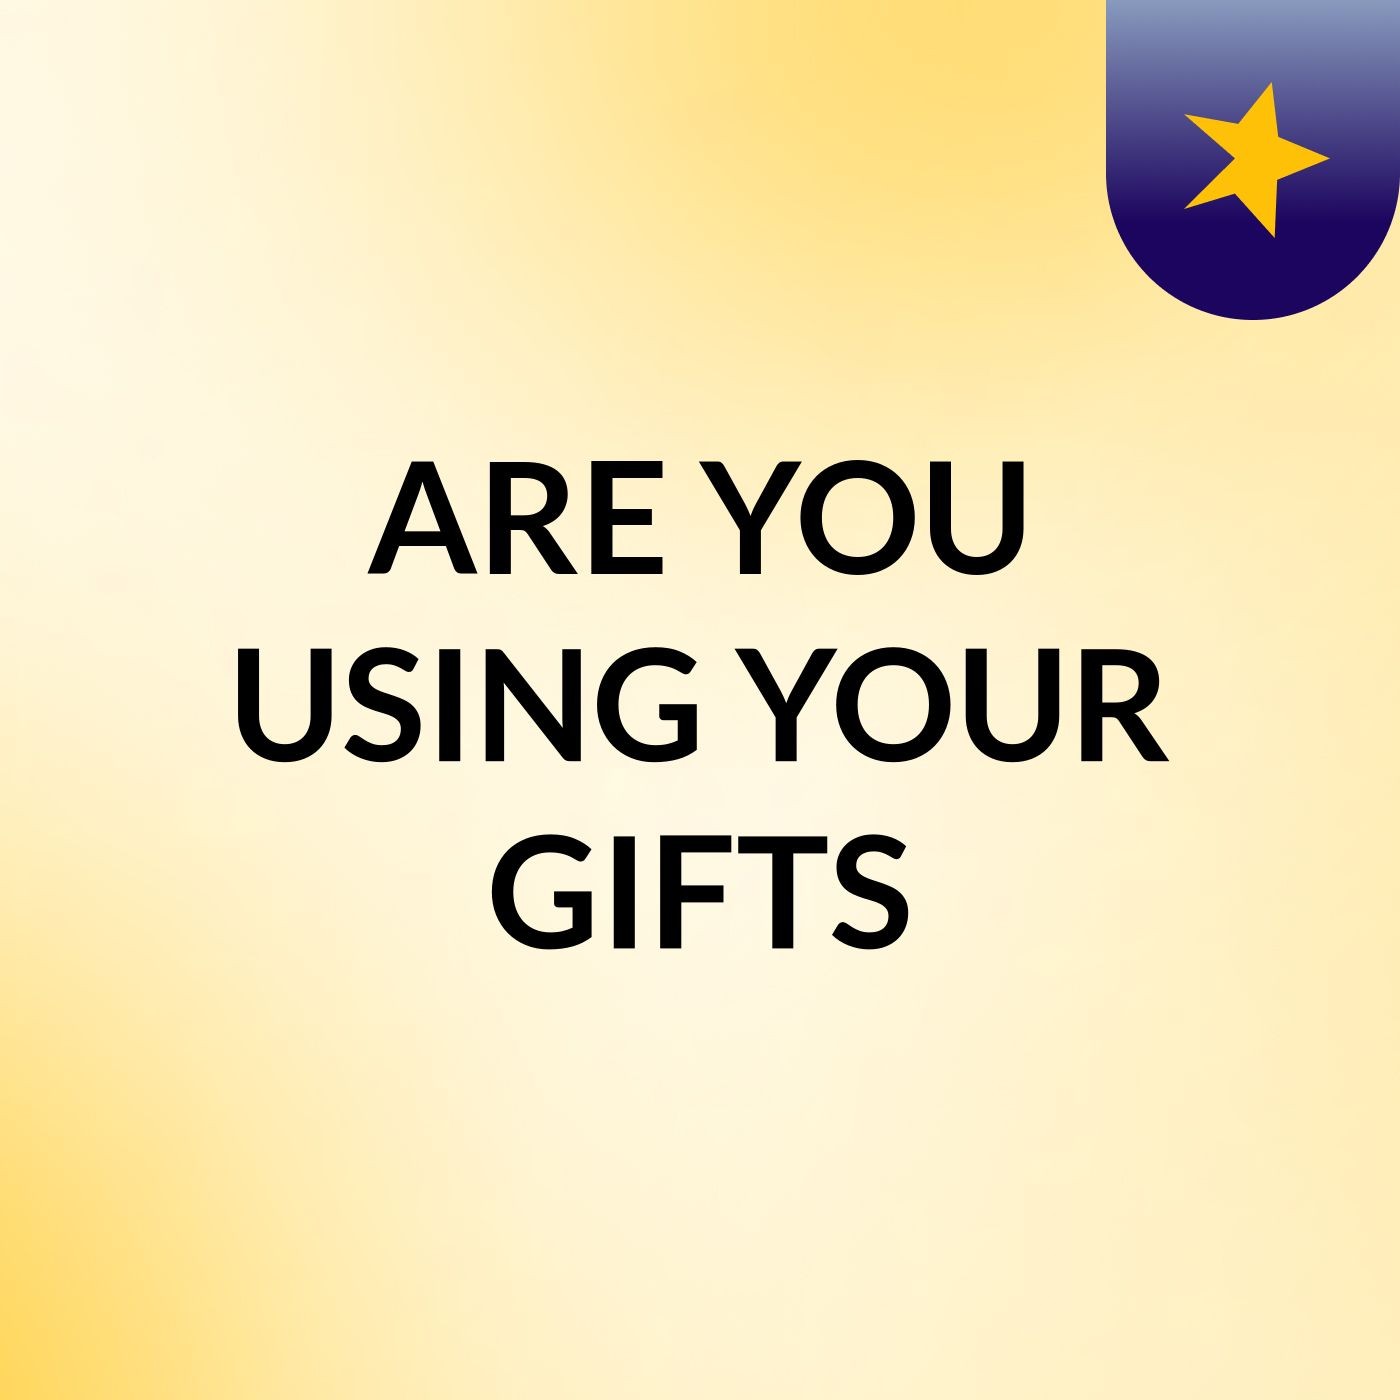 ARE YOU USING YOUR GIFTS